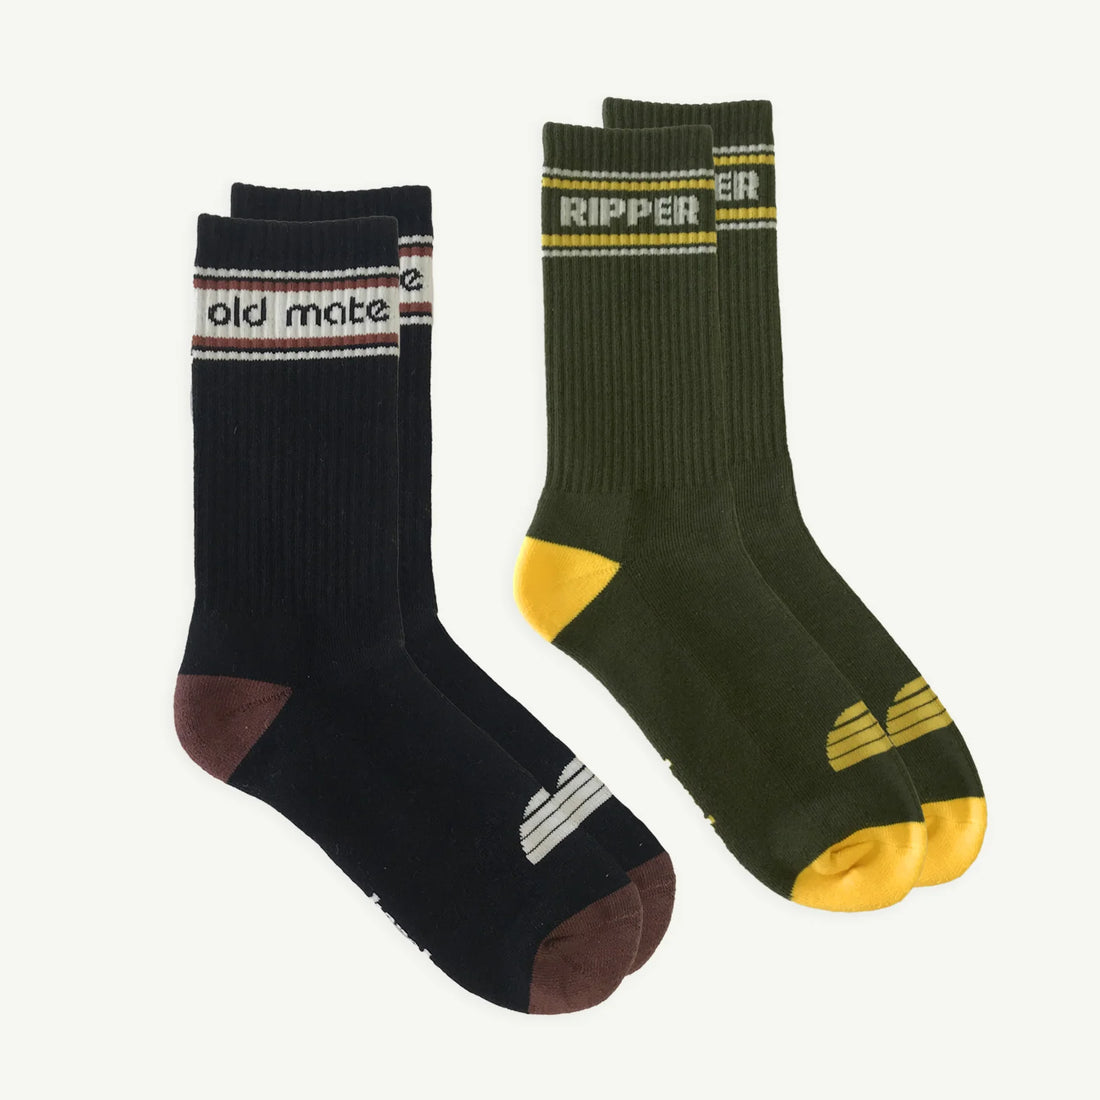 Banabae Old Mate and Ripper Organic Cotton Crew Sock Mens Sock Pack